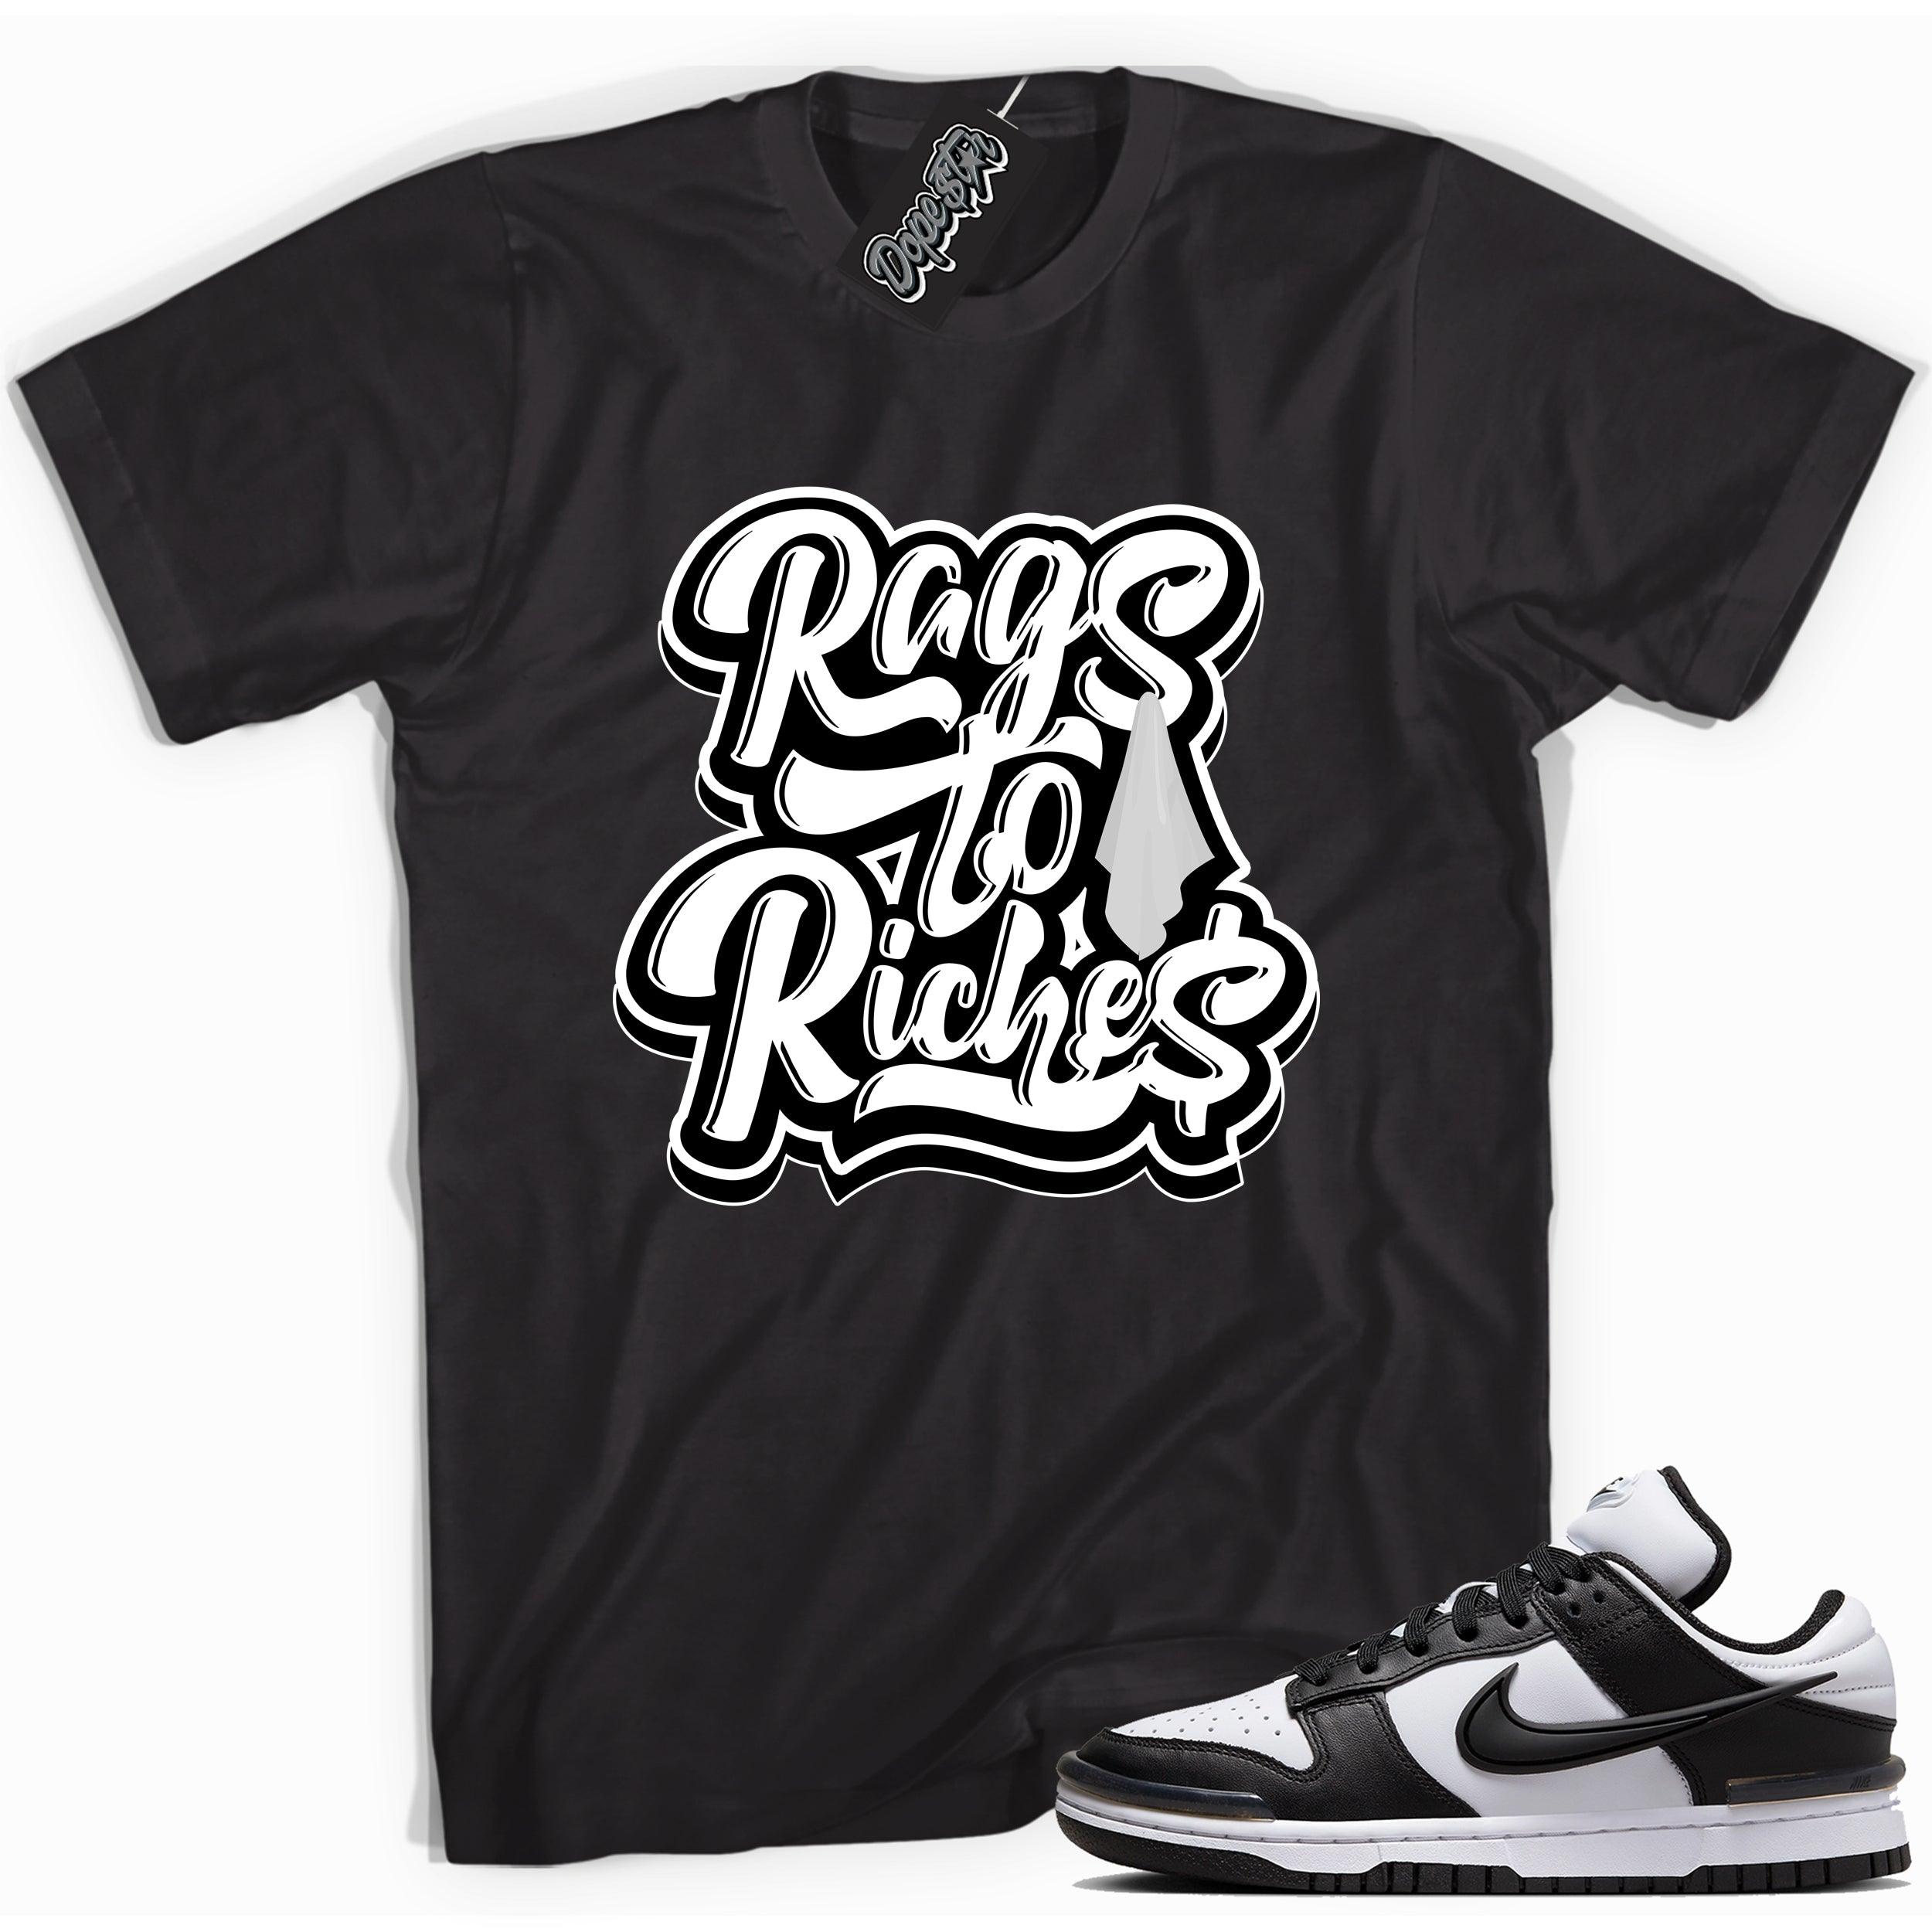 Cool black graphic tee with 'Rags to riches' print, that perfectly matches Nike Dunk Low Twist Panda sneakers.